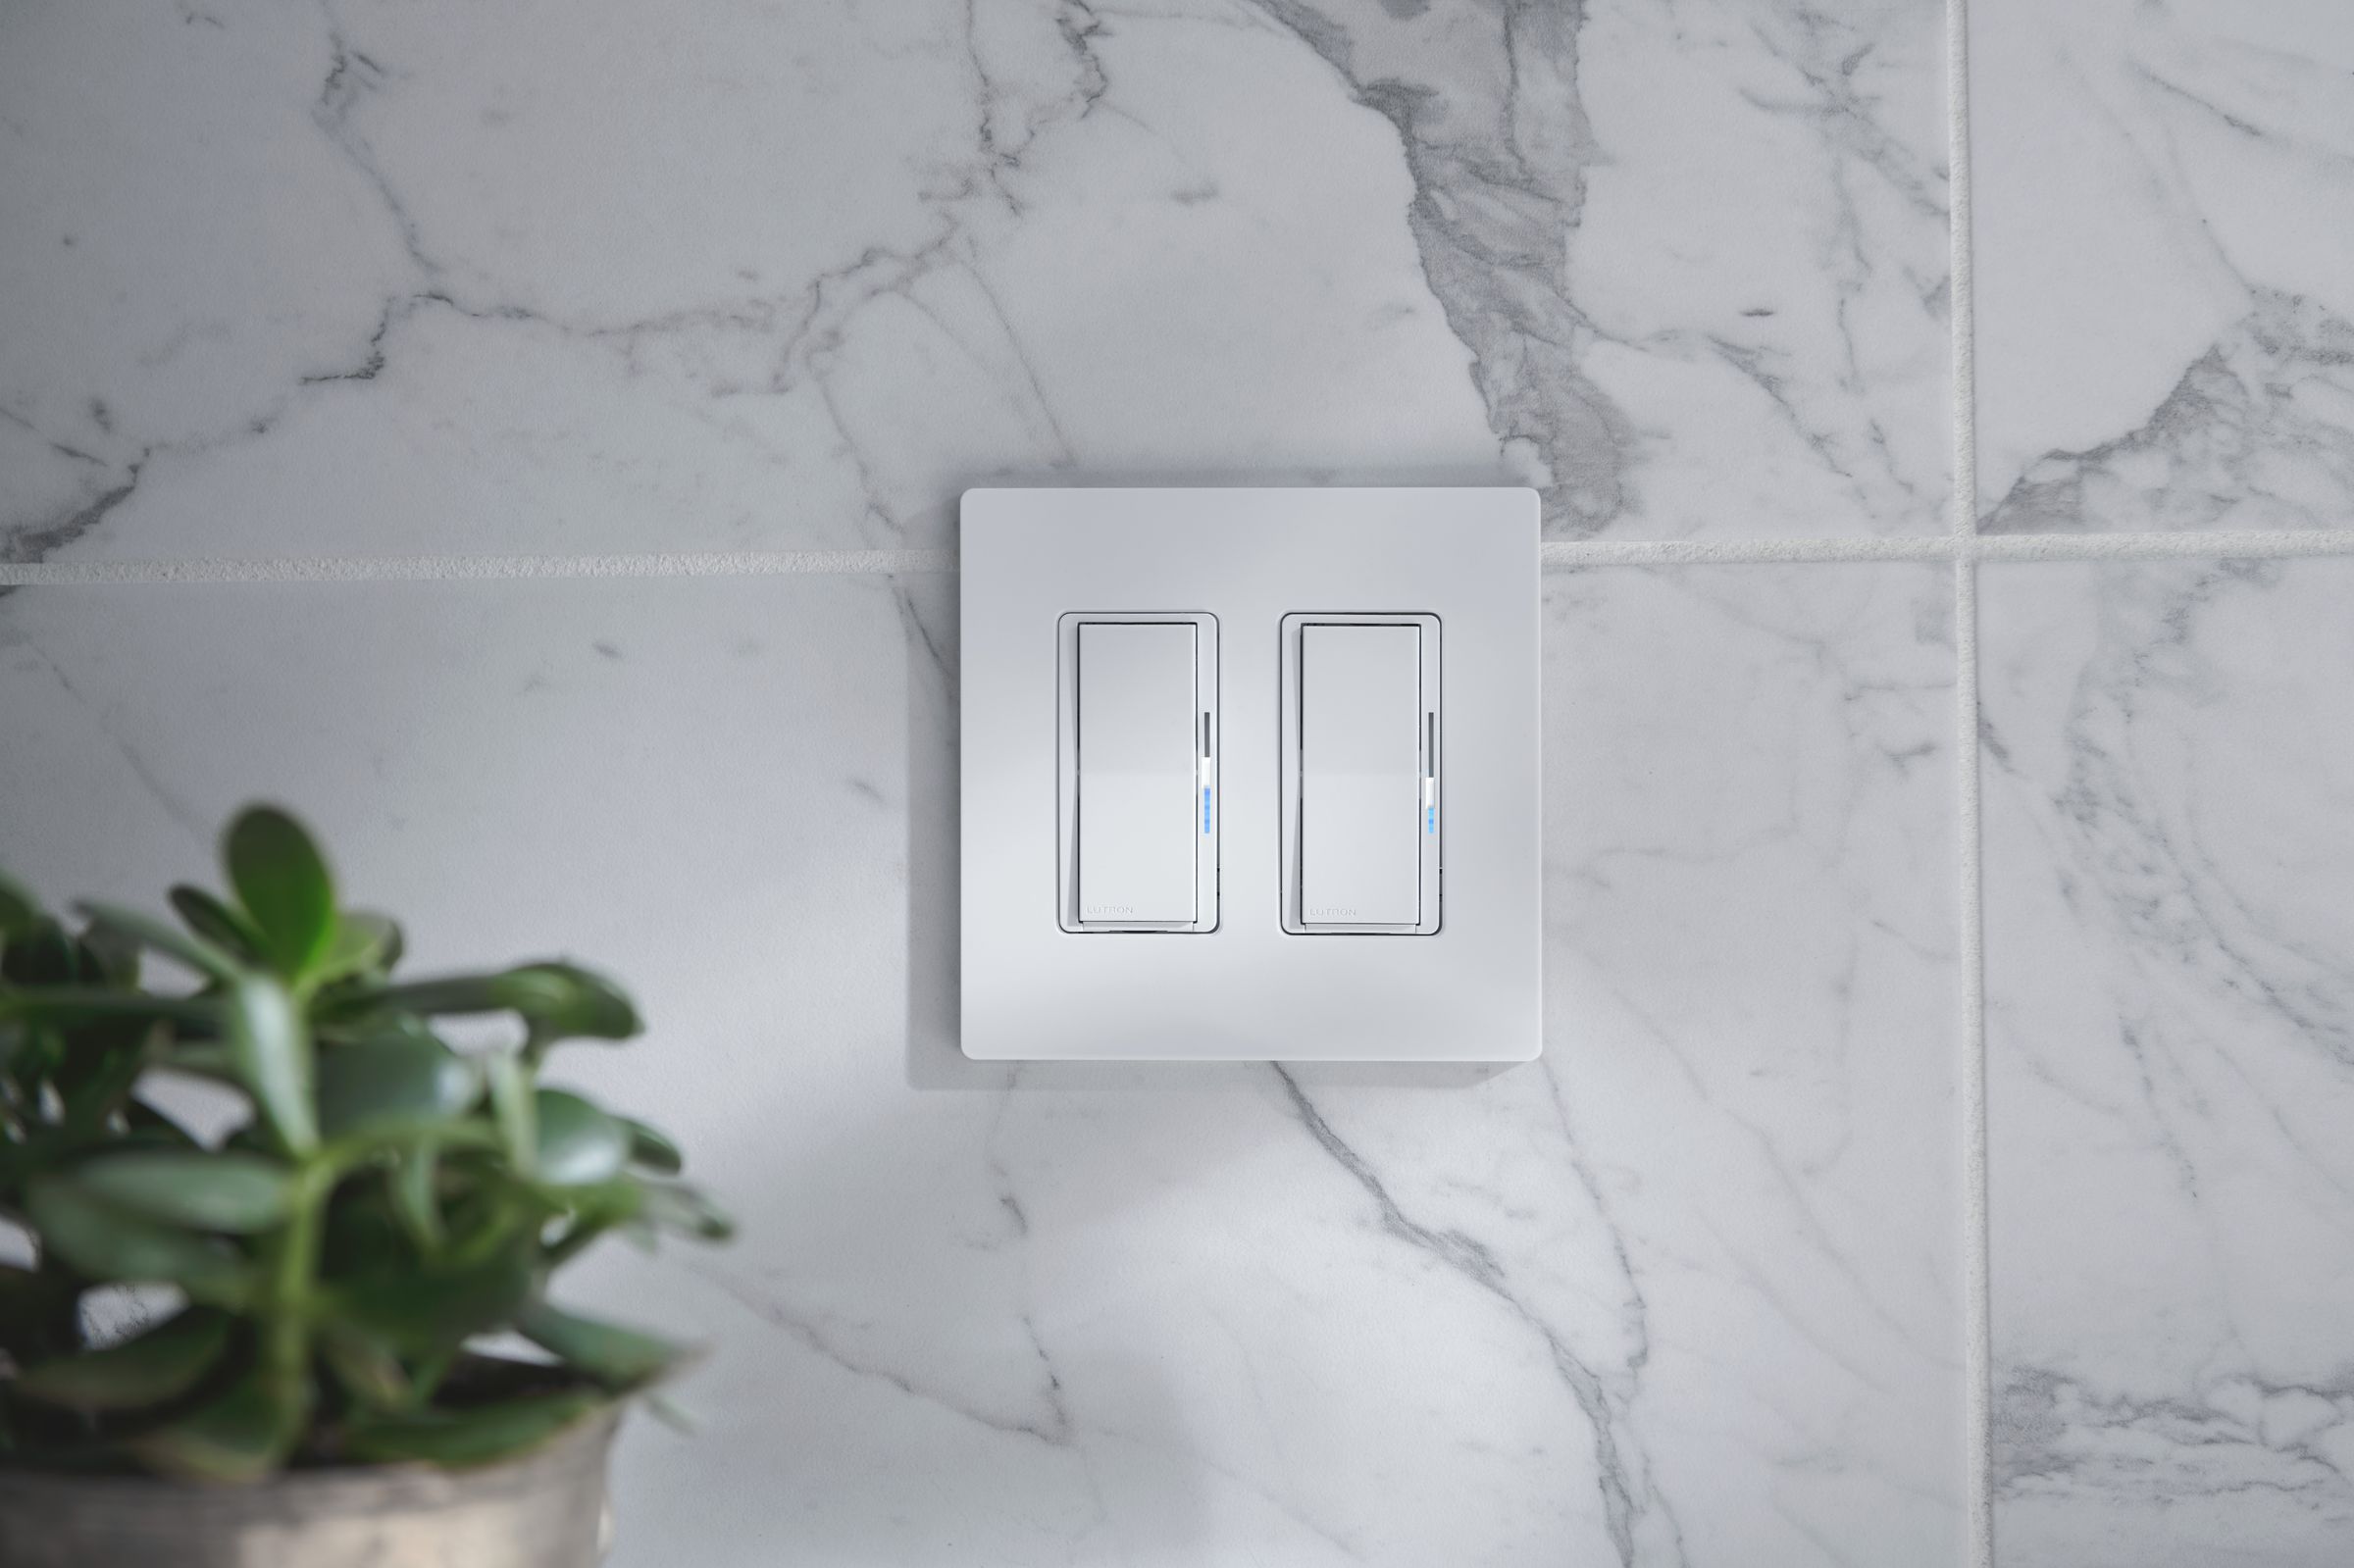 The new dimmer controls electronic low-voltage loads and supports LED, MLV, incandescent, and halogen lighting. It can also deal with humming and flickering issues.